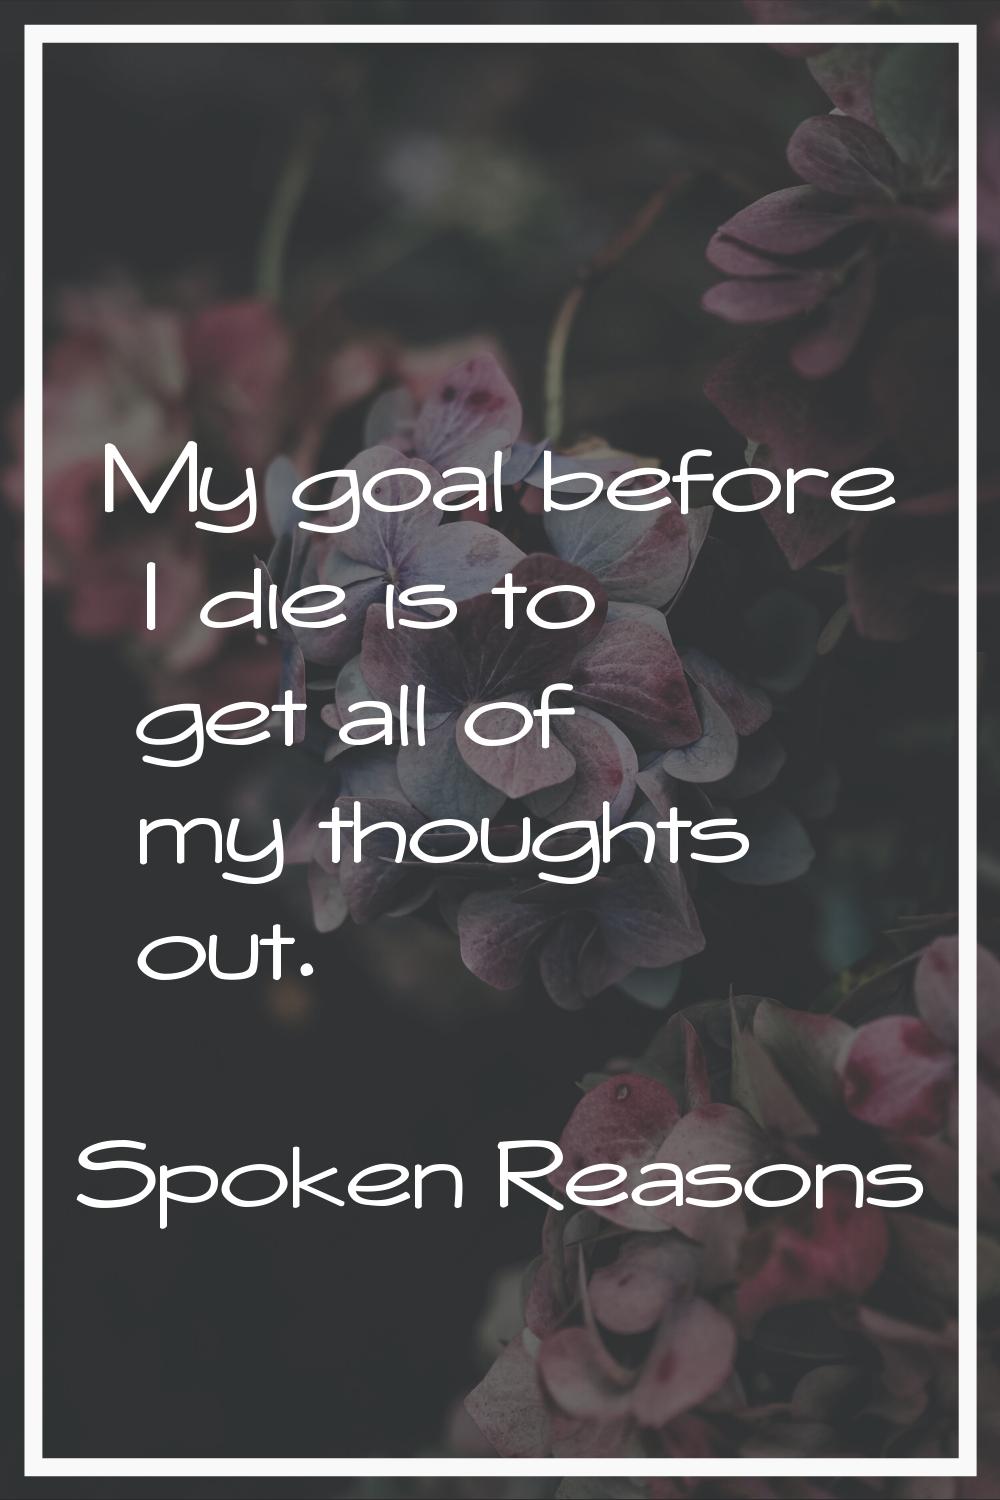 My goal before I die is to get all of my thoughts out.